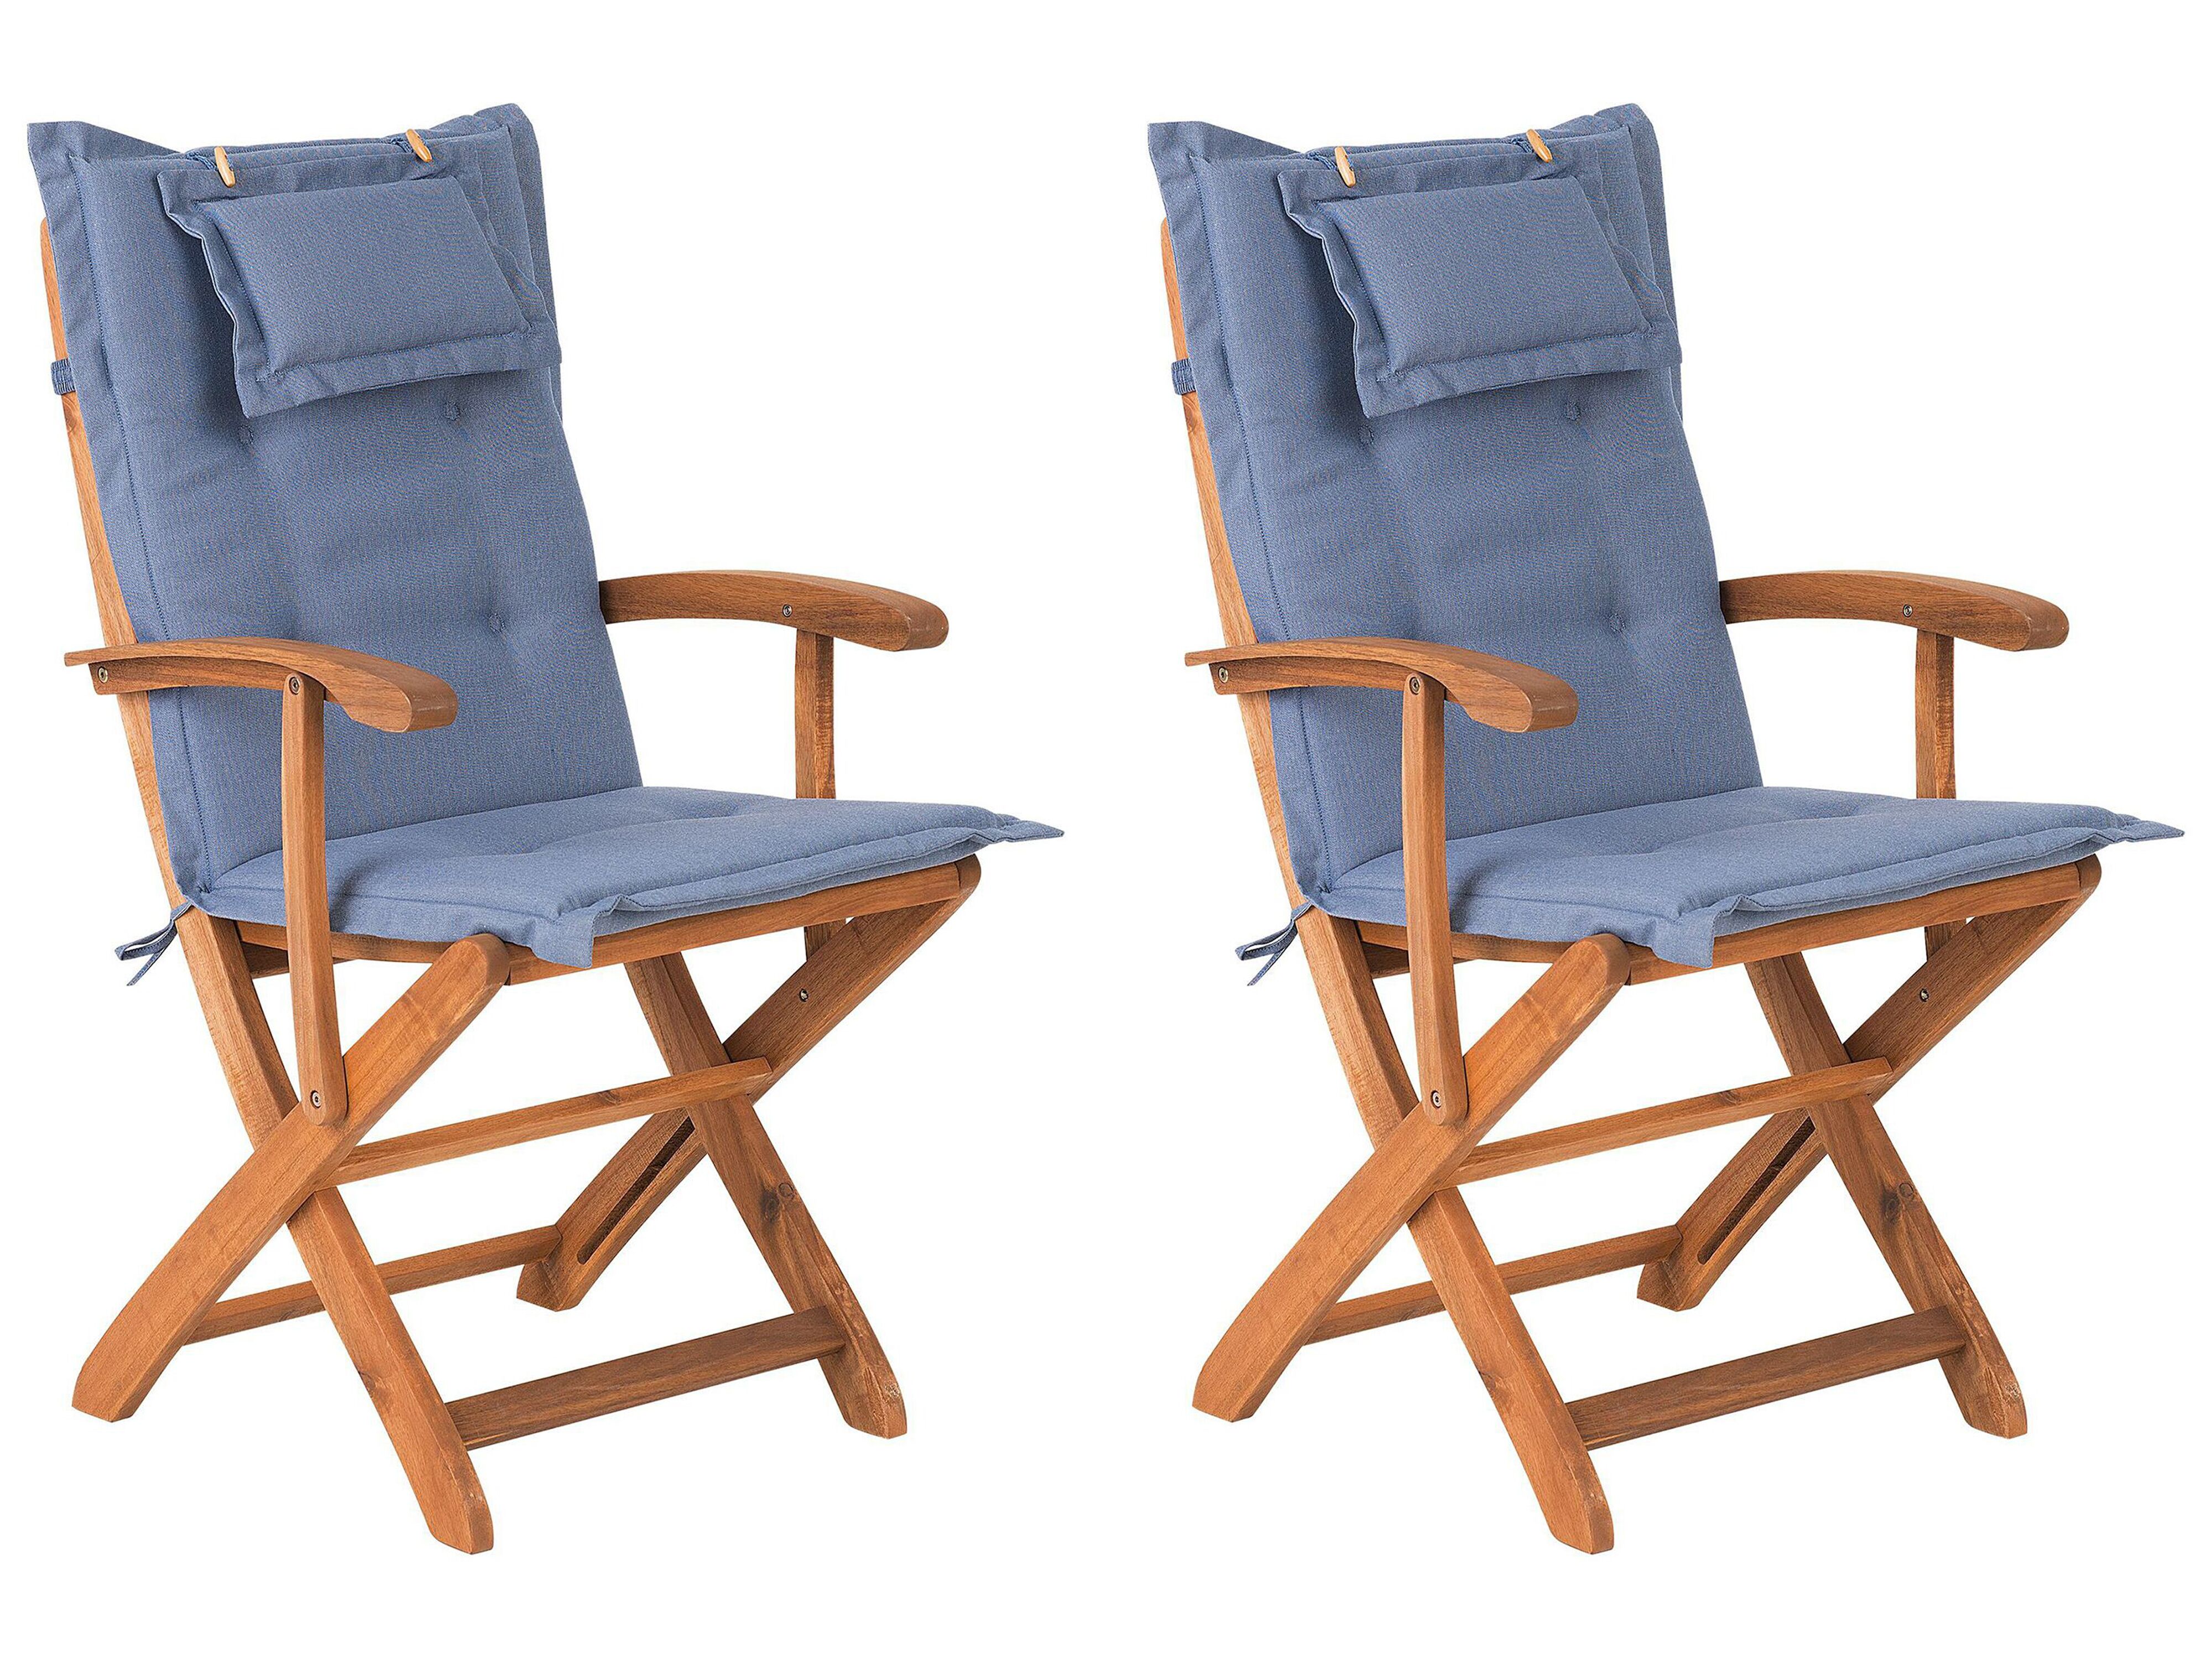 Set of 2 Garden Folding Chairs with Blue Cushions MAUI